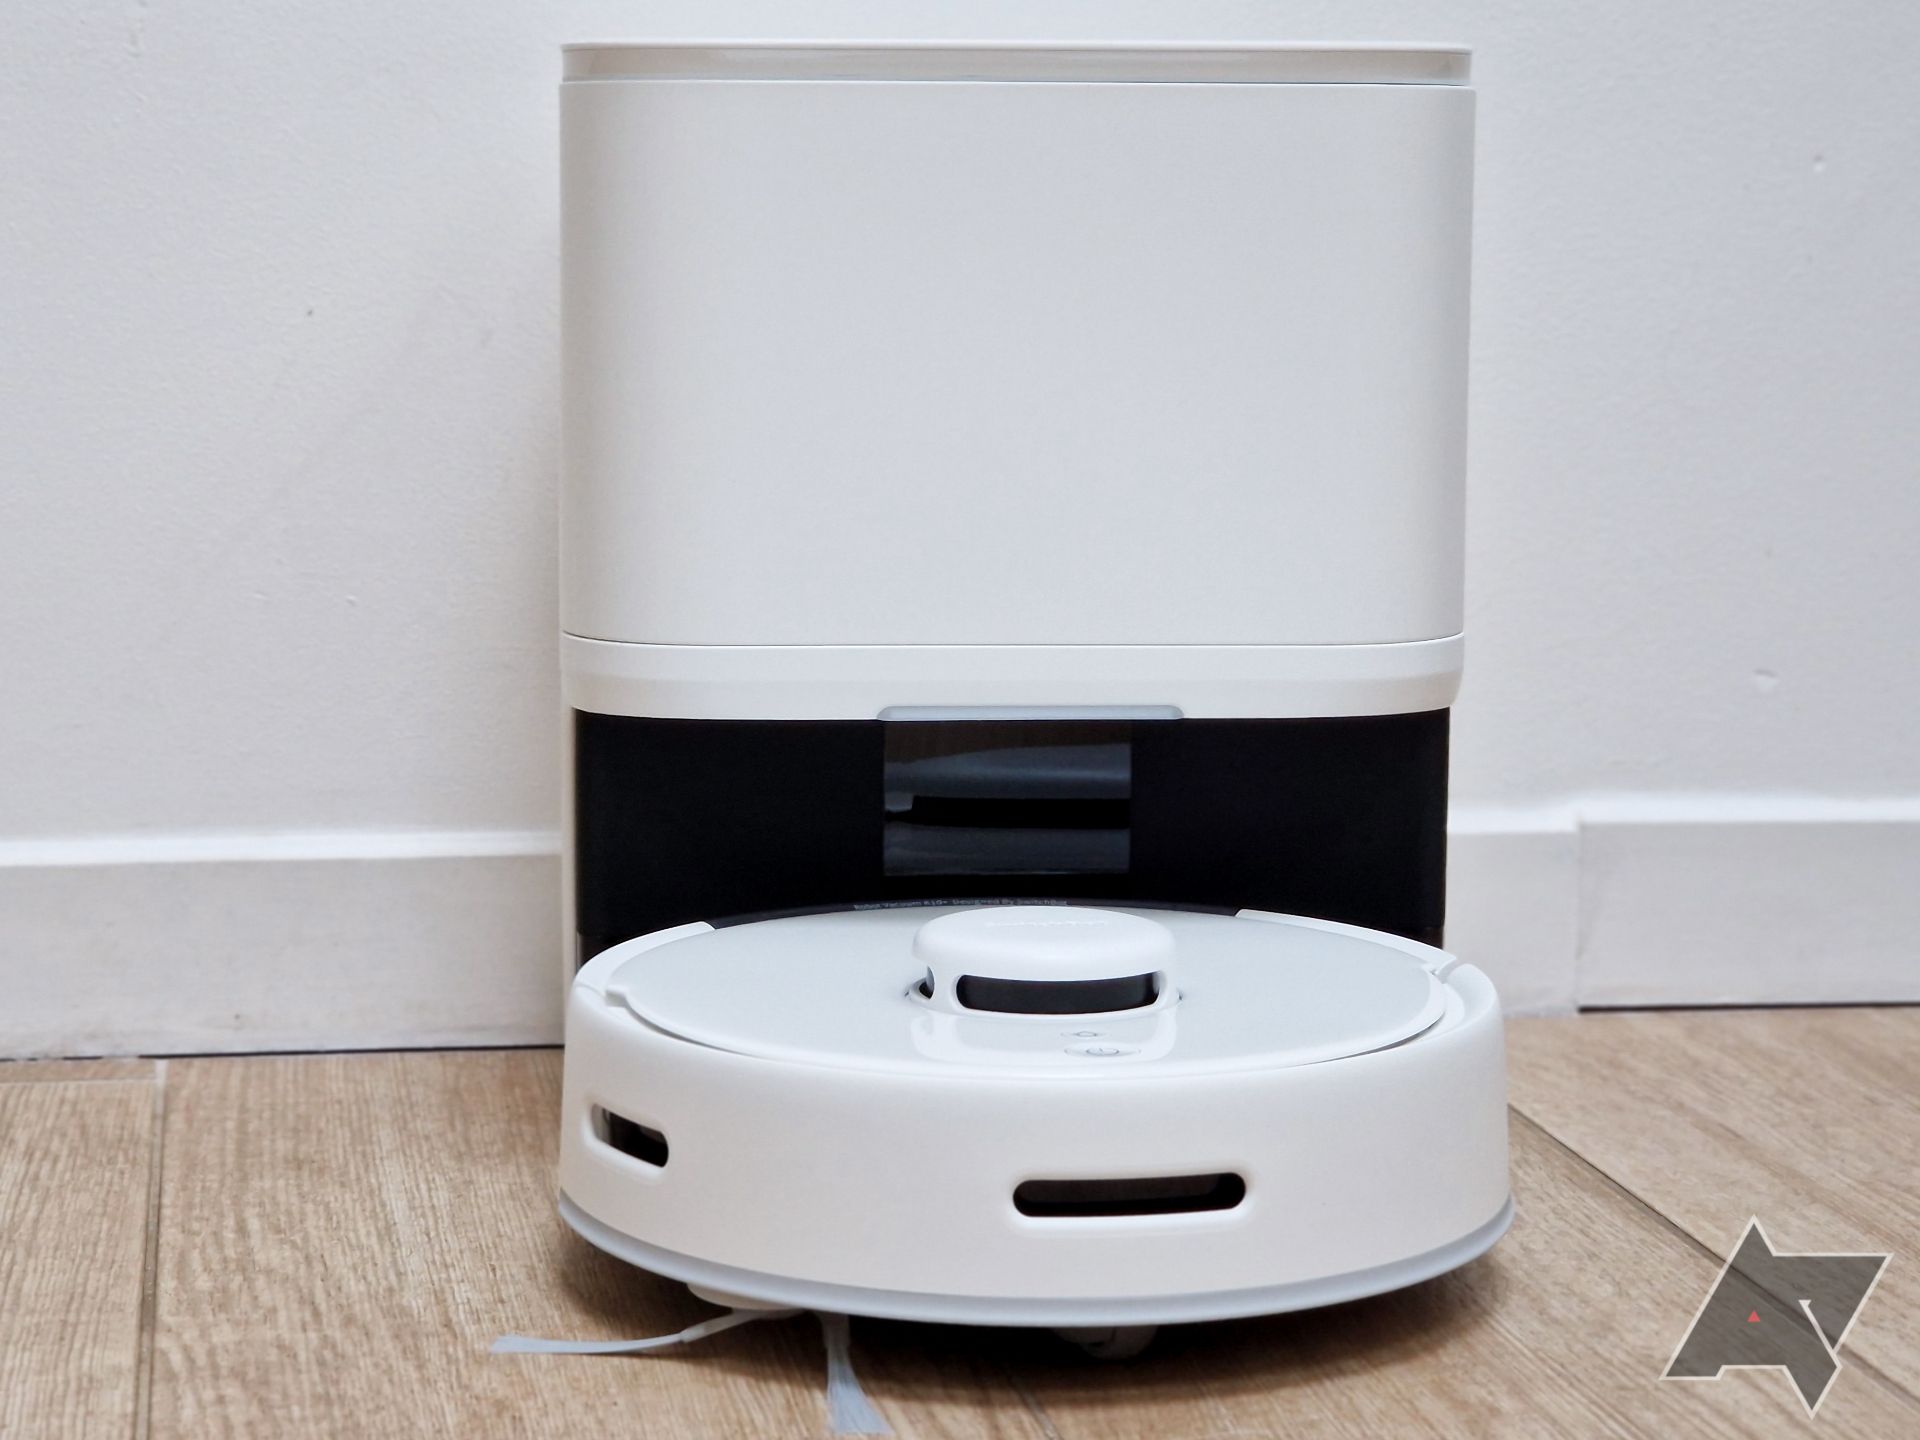 Picture of the SwitchBot K10+ Mini robot vacuum cleaner and its base station